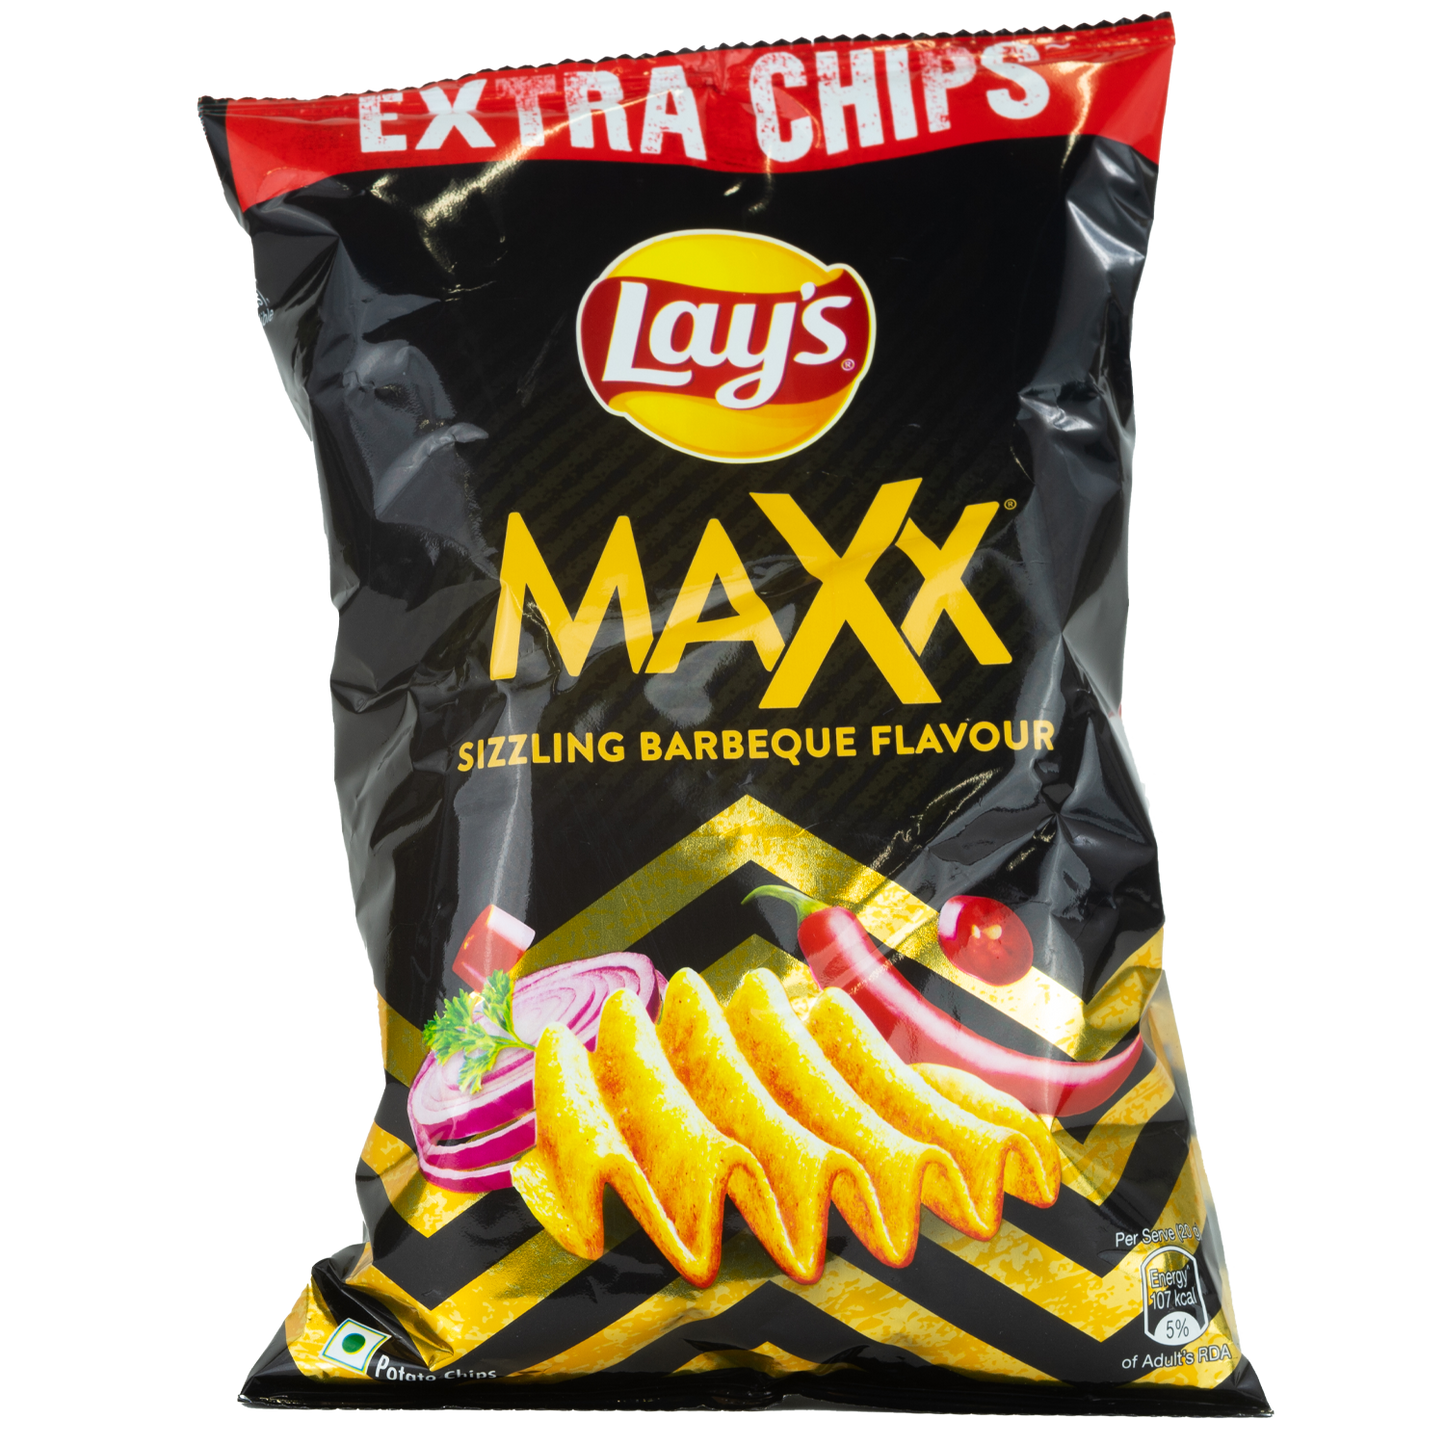 Lays MAXX Sizzling Barbeque Flavor Chips 50g